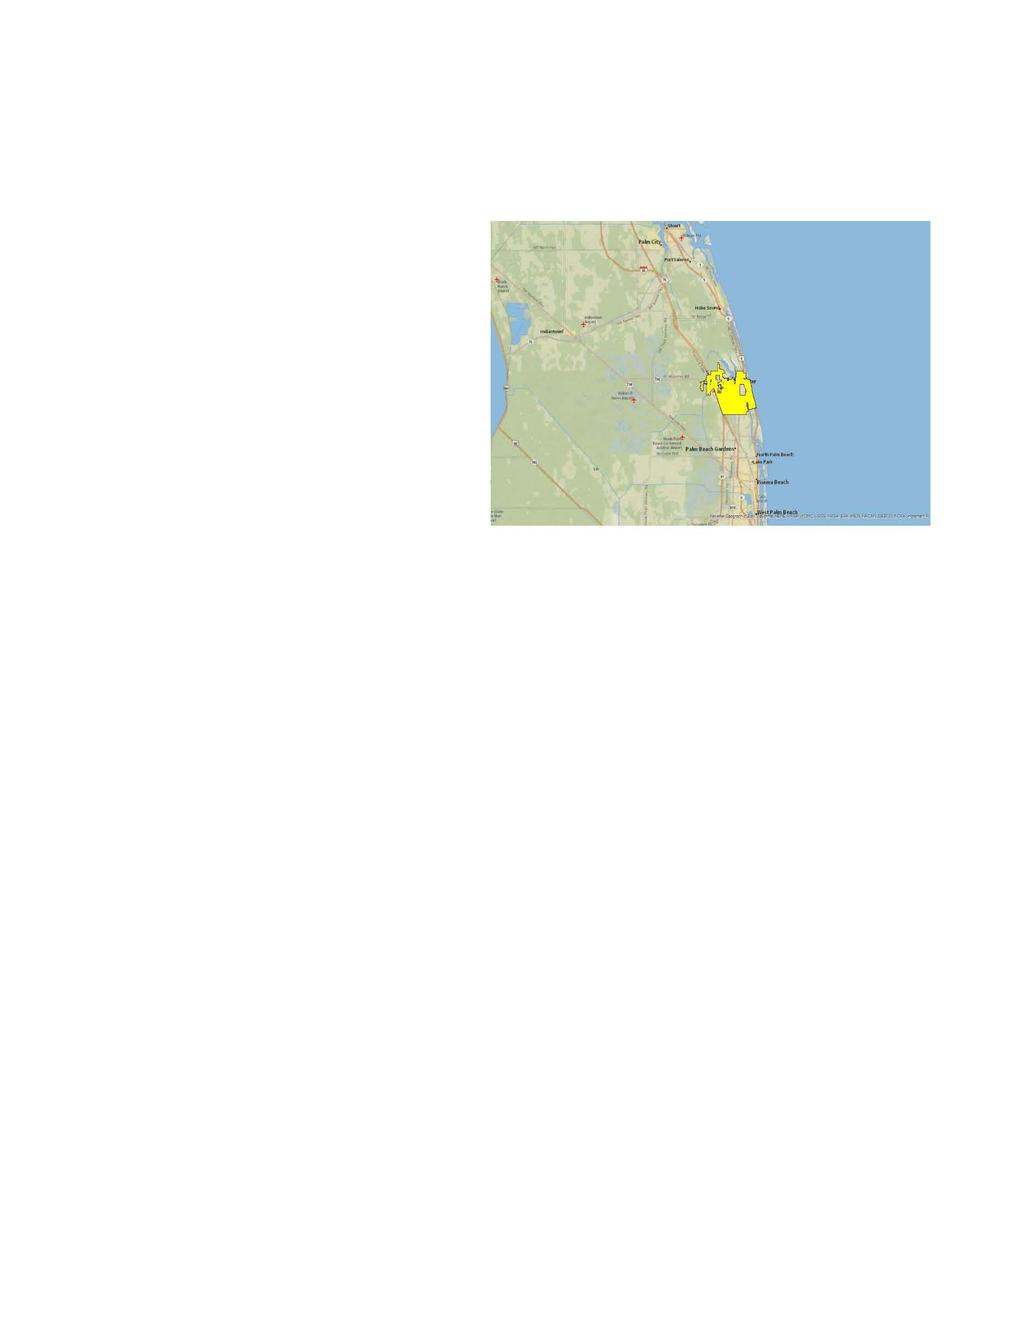 1.0 INTRODUCTION The Town of Jupiter is located on the southeastern coast of Florida within Palm..."... Beach County. Figure 1 illustrates a location map of the Town.